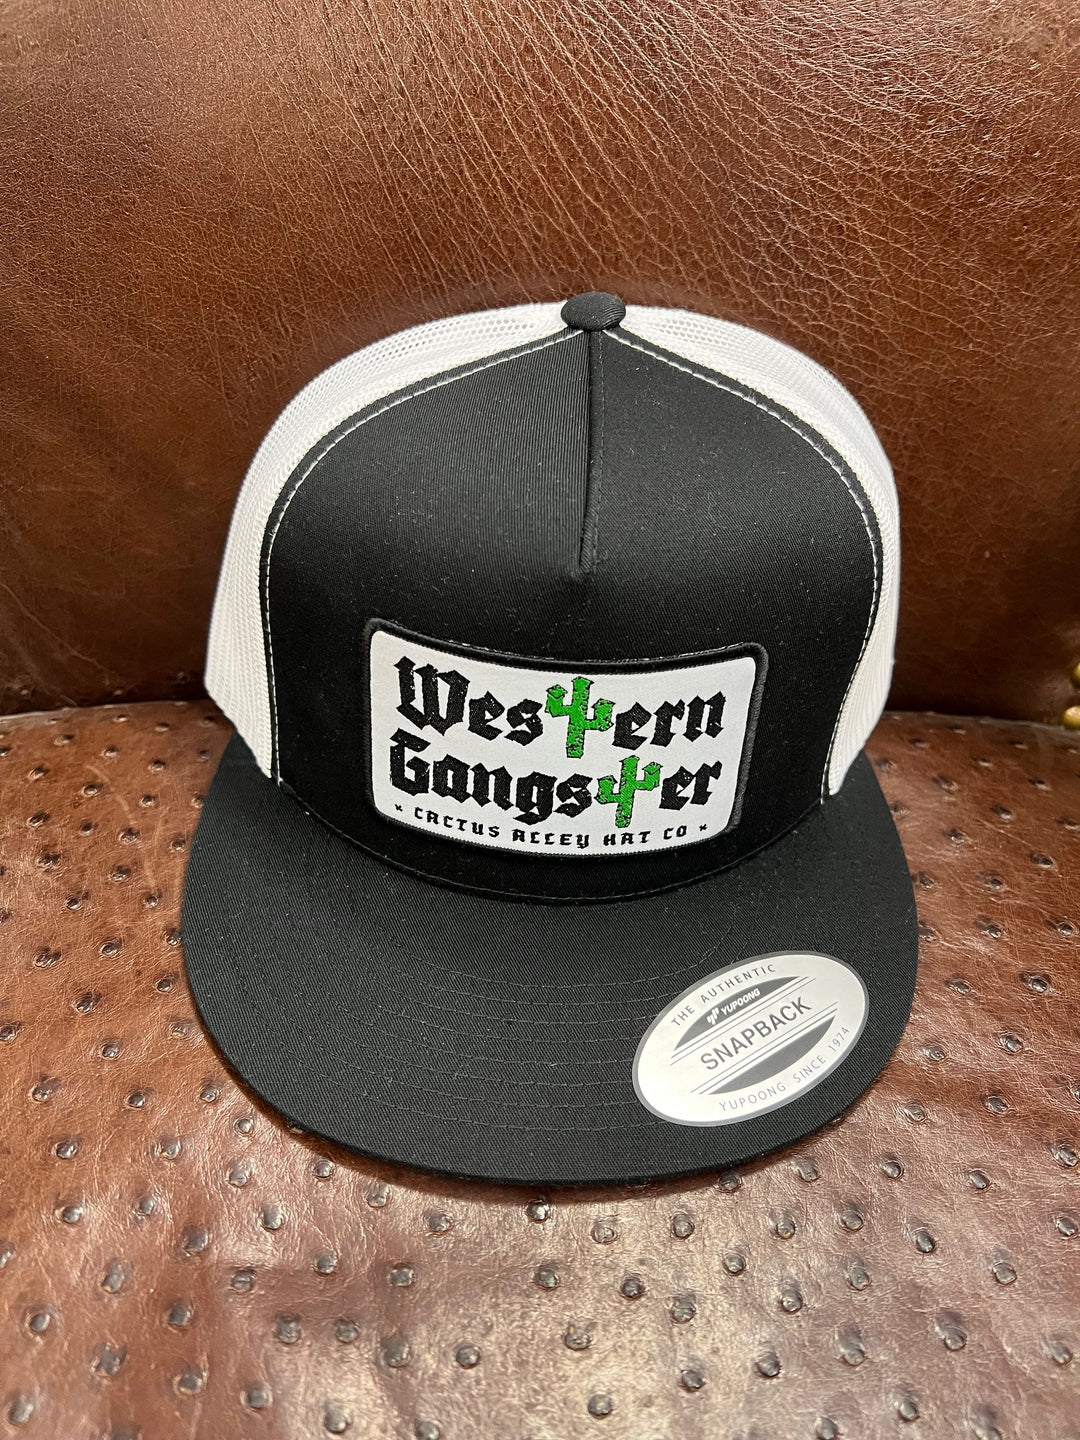 Cactus Alley 5 Panel Black/White Back Western Gangster Patch